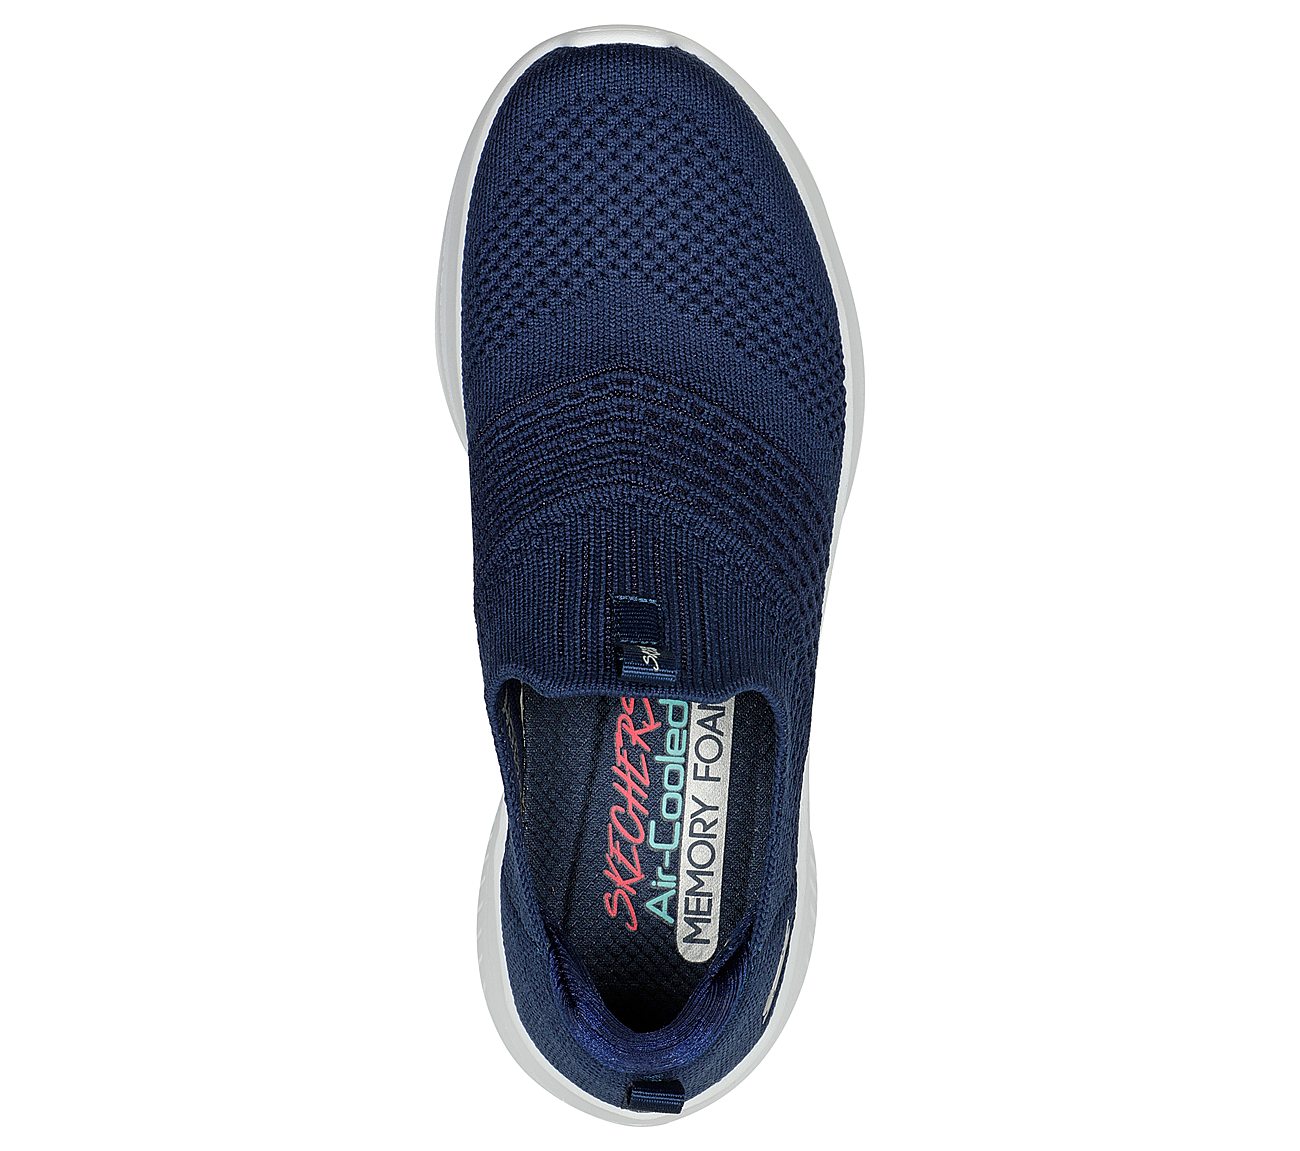 ULTRA FLEX 3.0-CLASSY CHARM, Navy image number null